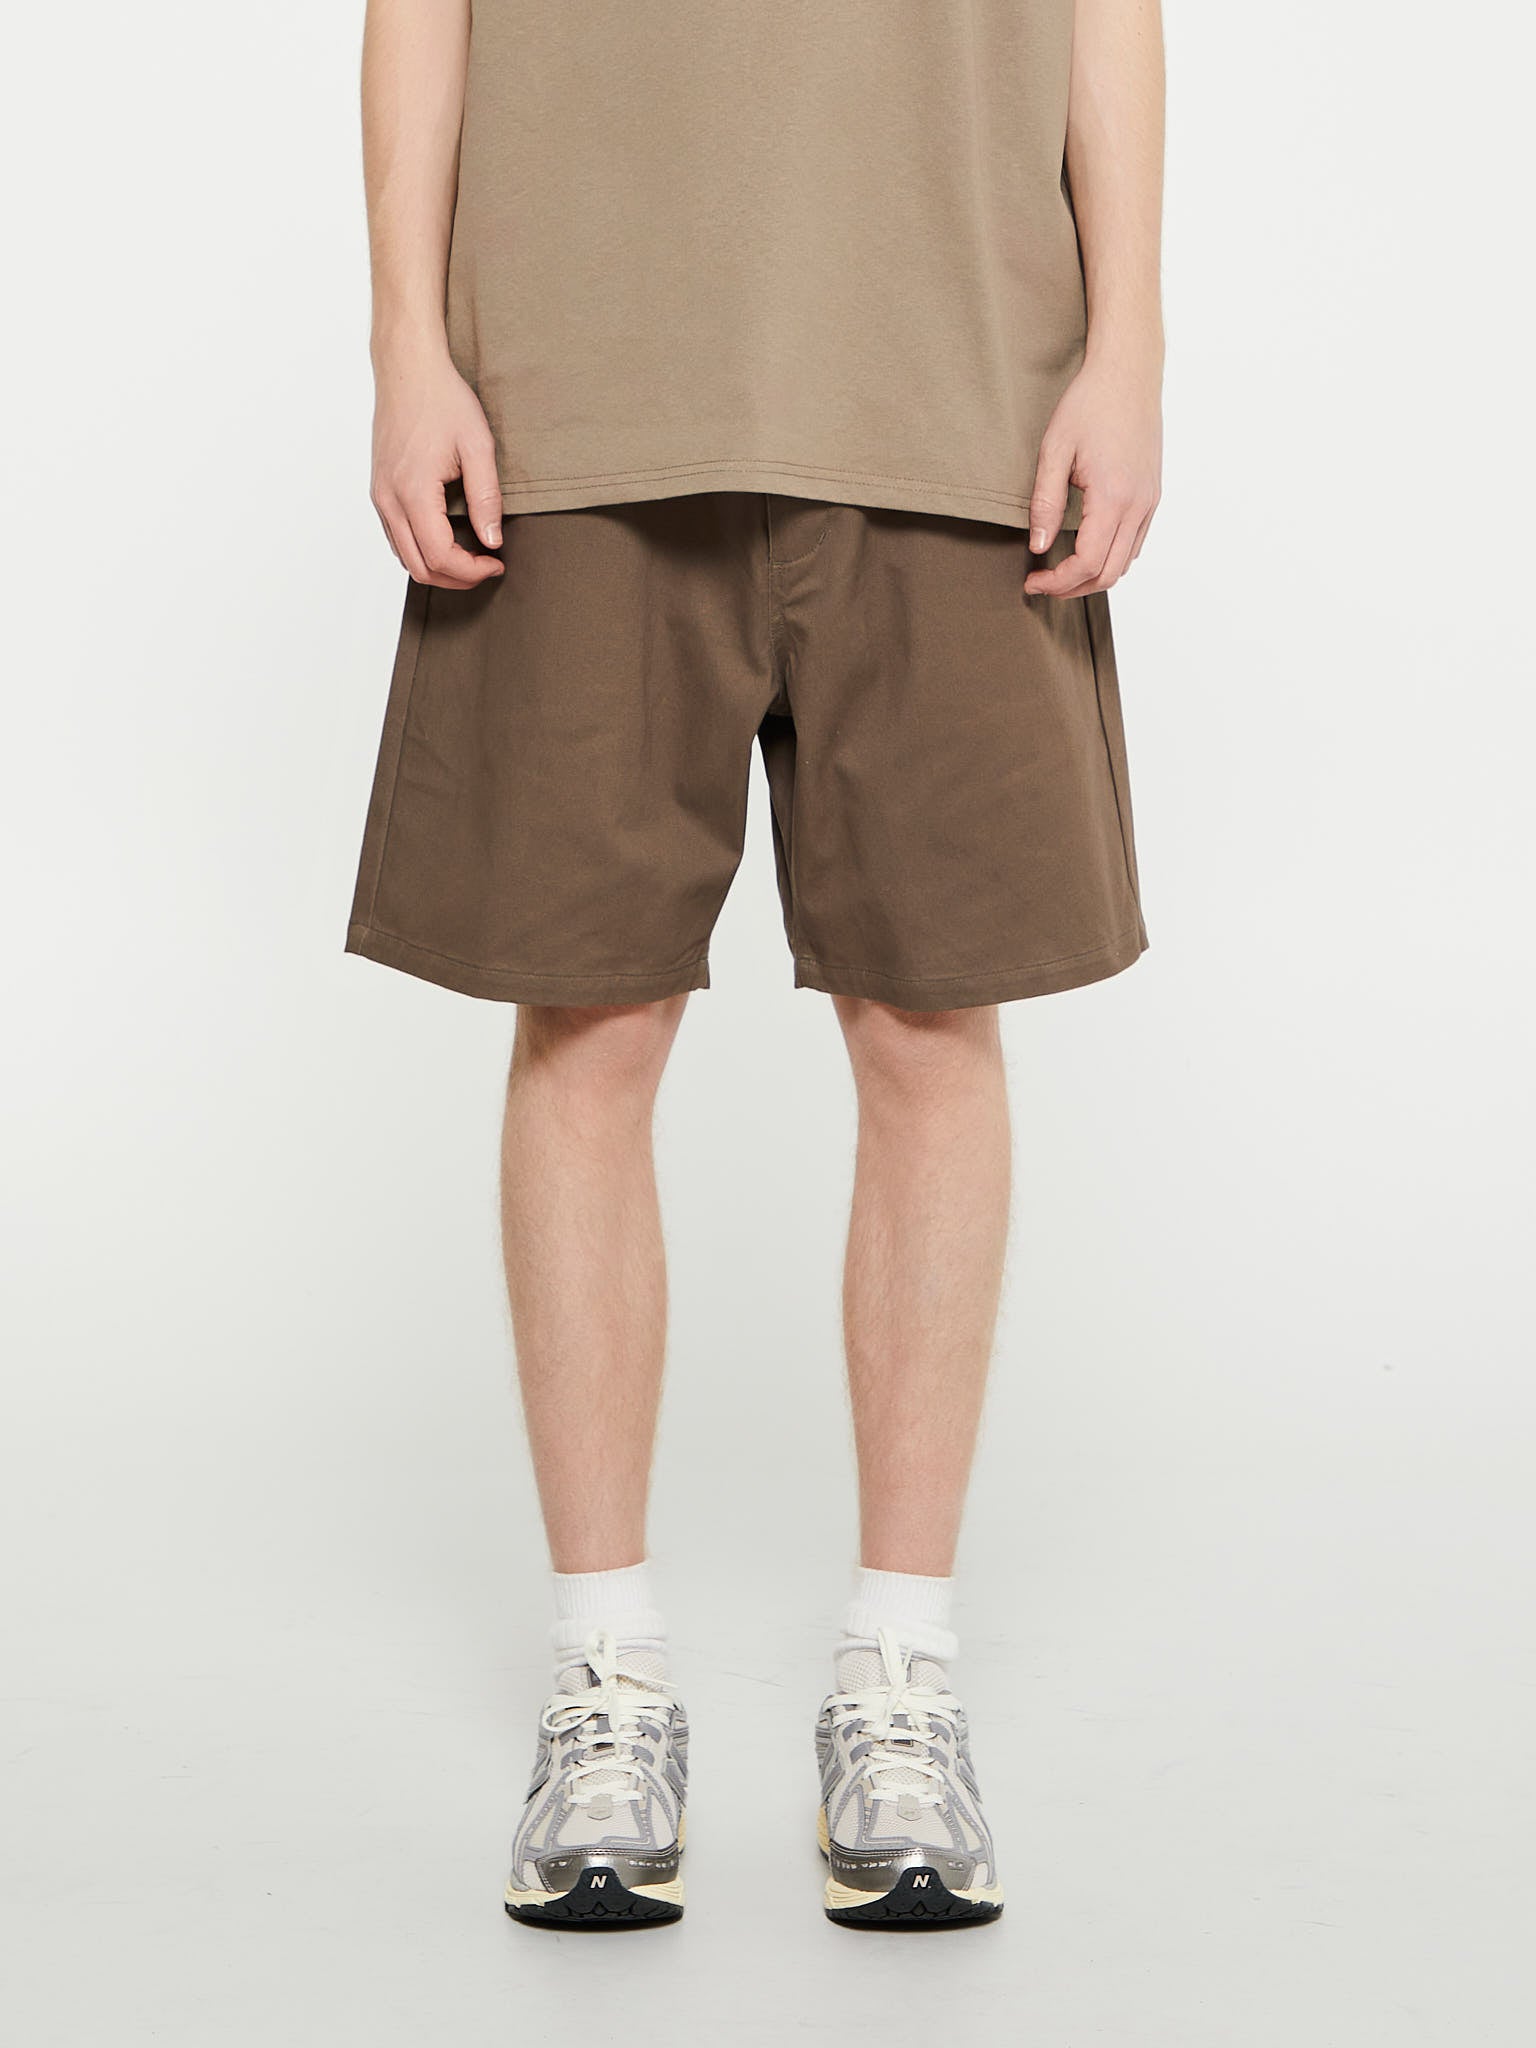 Pas Normal Studios - Off-Race Cotton Twill Shorts in Brown